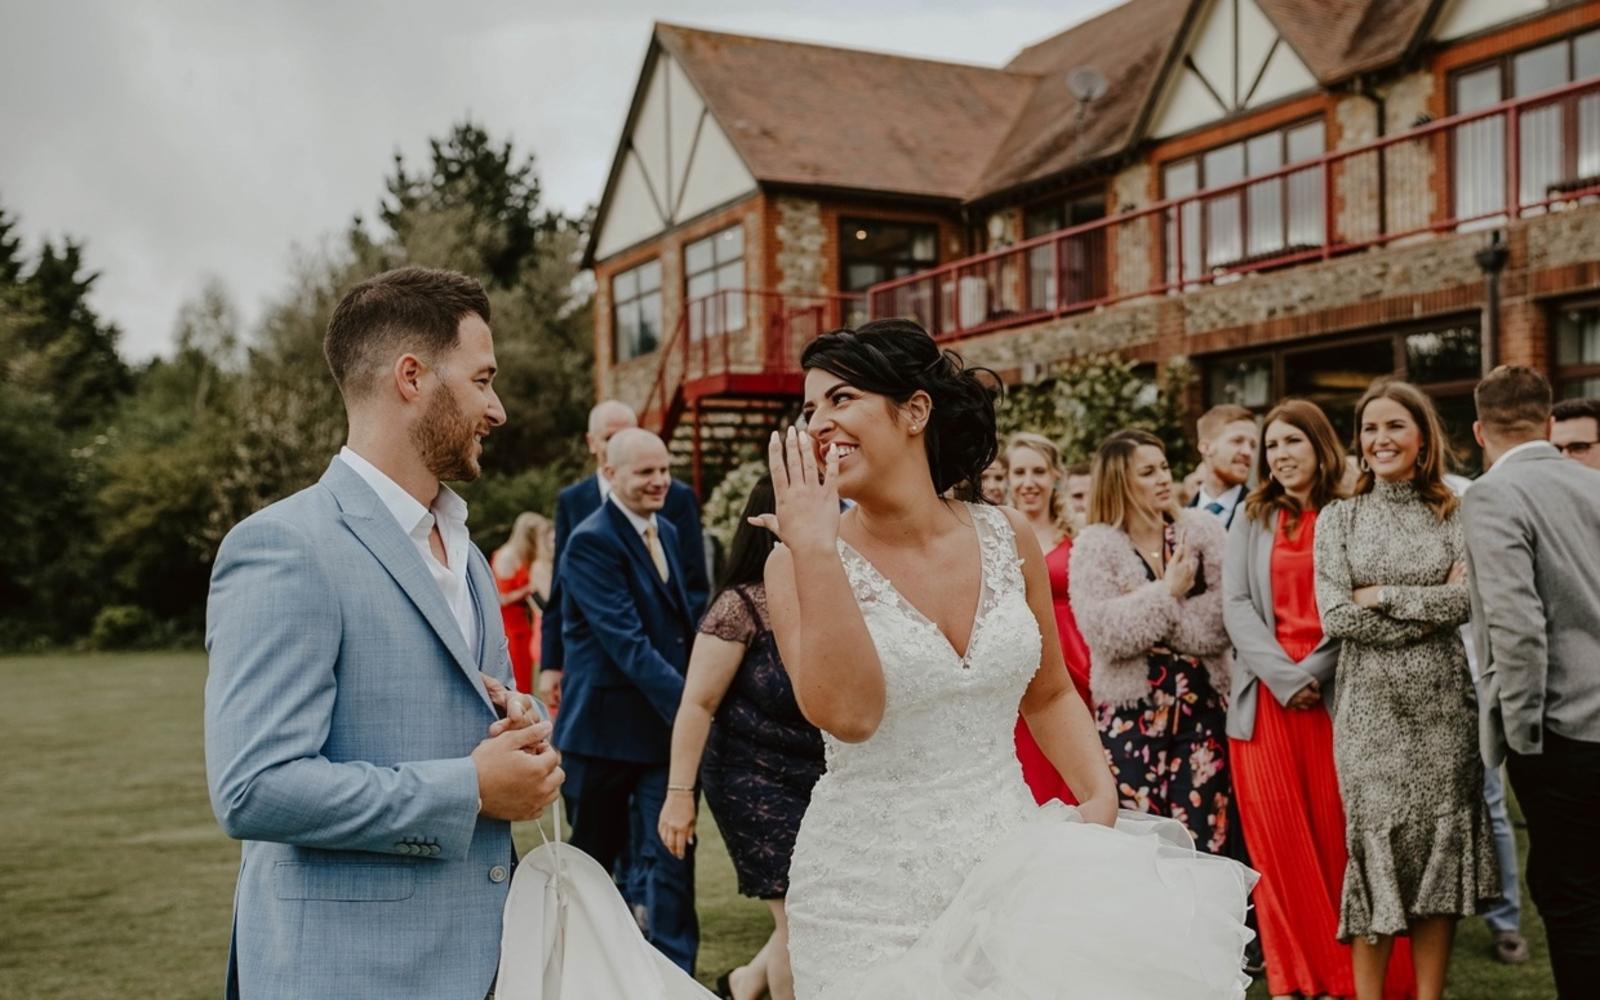 Wrag Barn Golf and Country Club wedding venue Highworth Swindon Wiltshire fully licensed for civil ceremonies Joanna Brooks Photography wedding guests